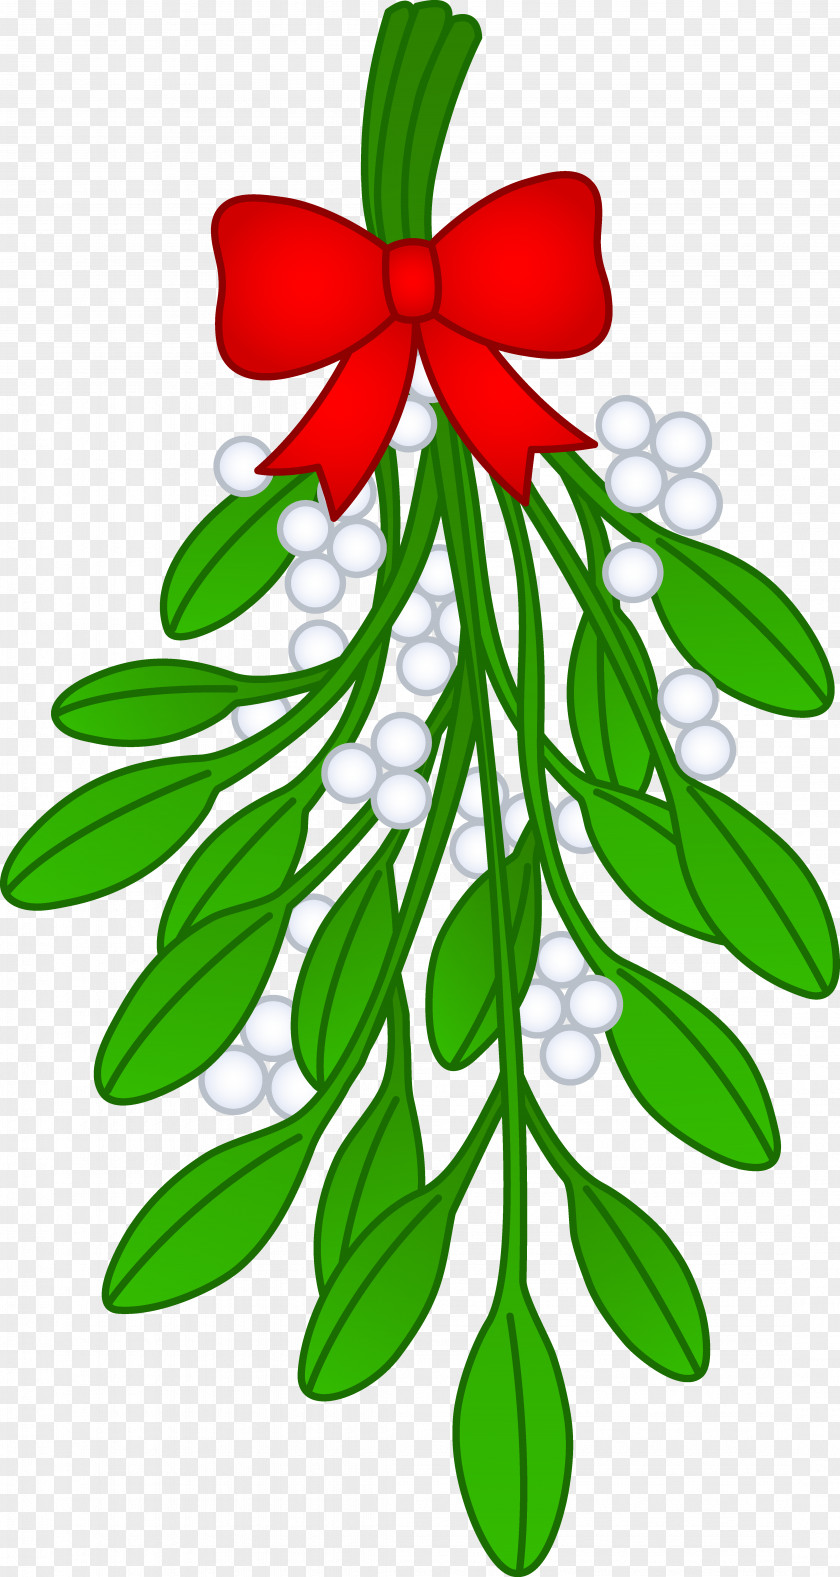 Mistletoe Cliparts Drawing Phoradendron Tomentosum Clip Art PNG